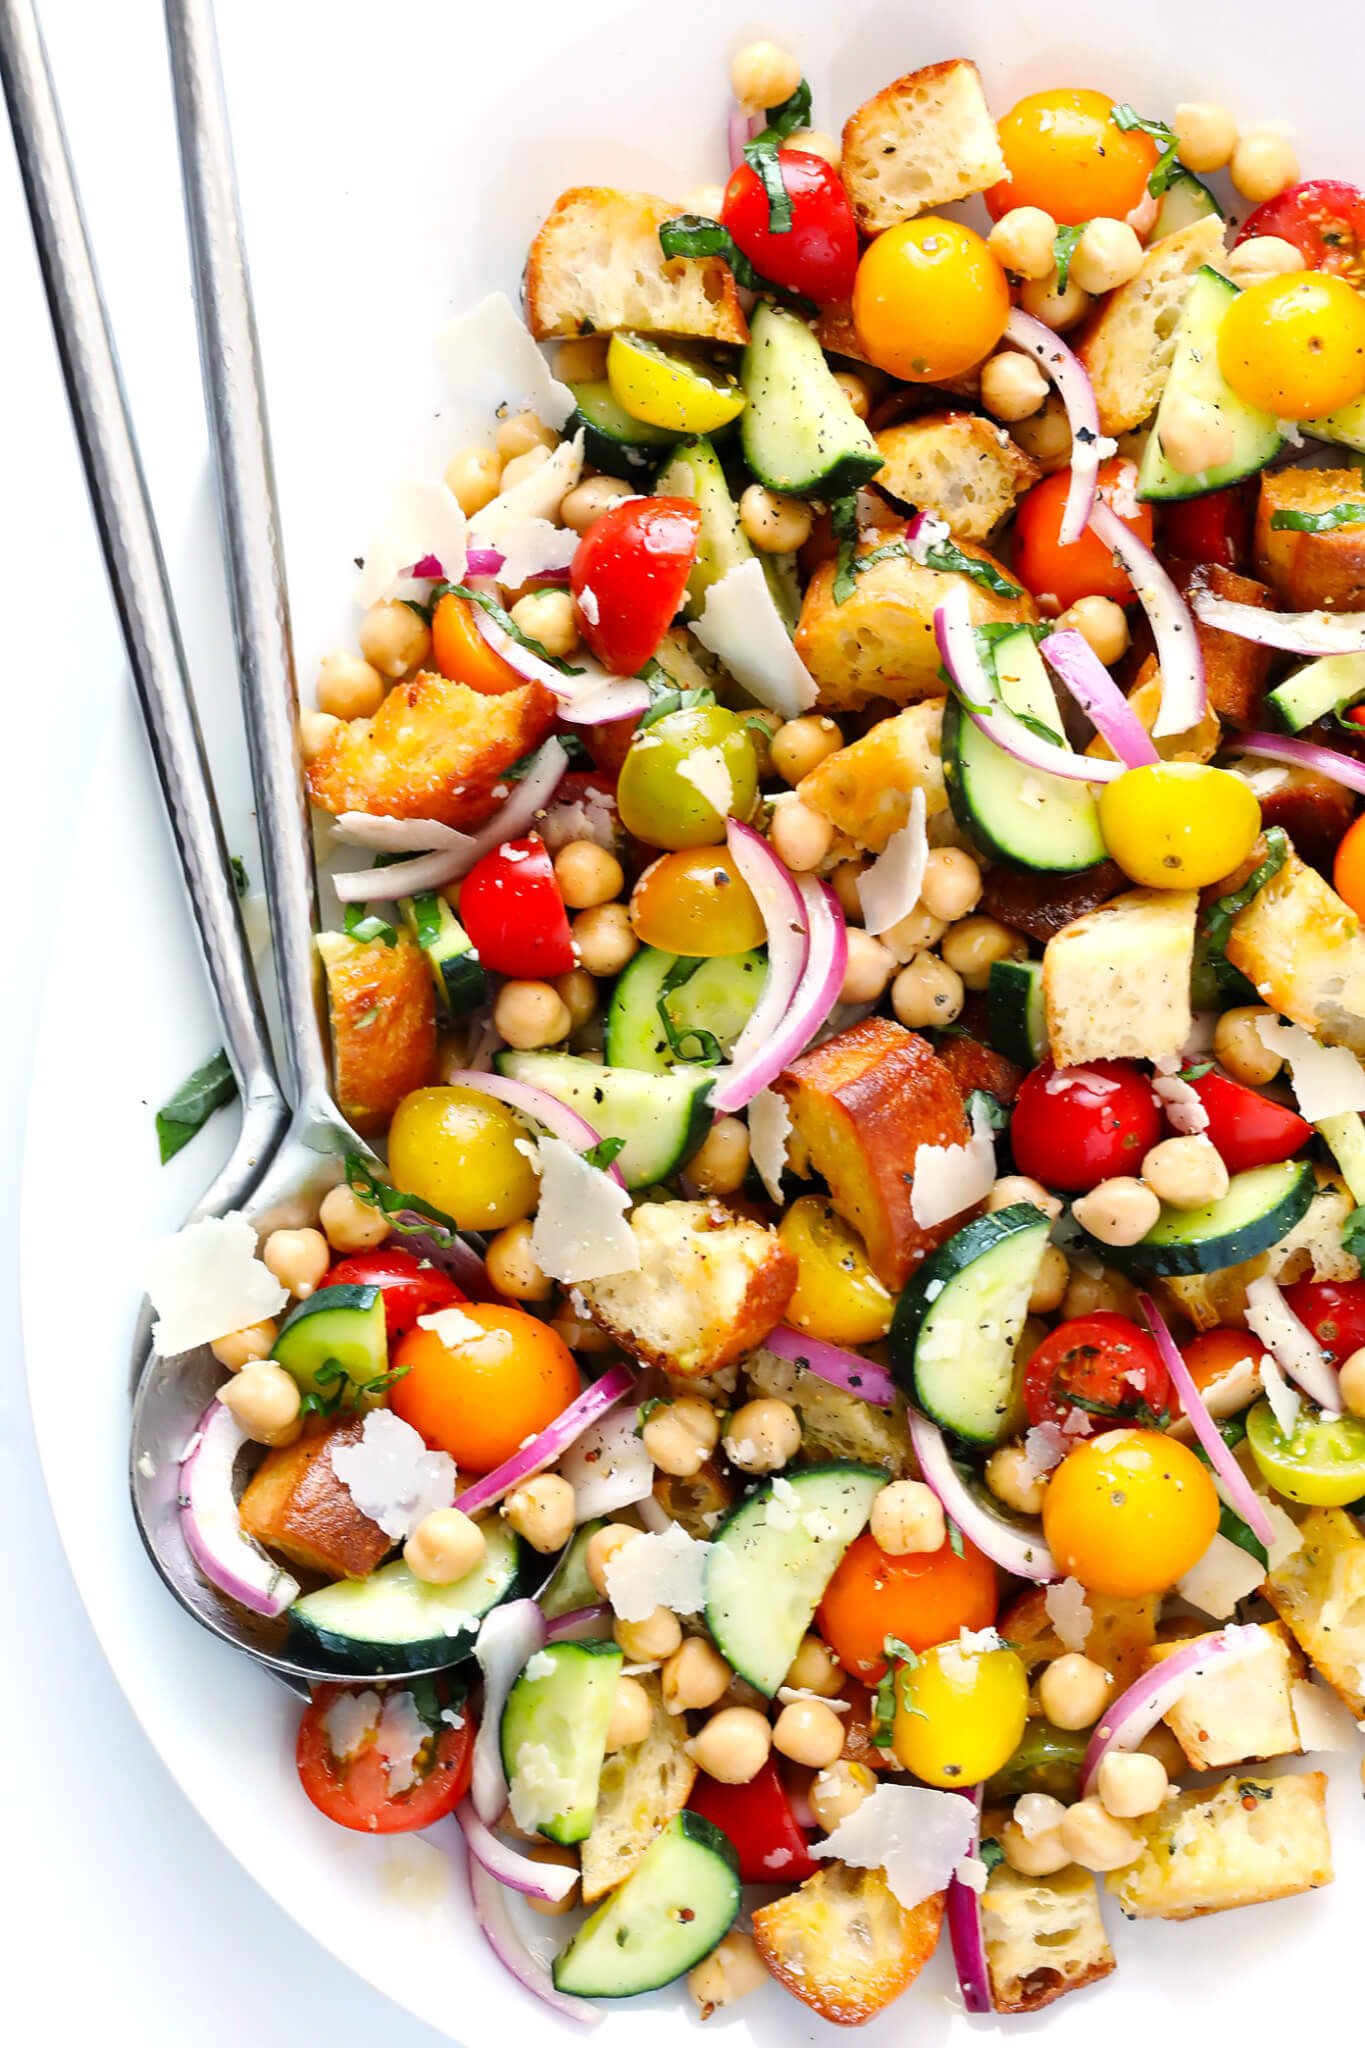 LOVE this easy panzanella recipe! It's full of cherry tomatoes, veggies, toasted buttery bread, chickpeas, basil, and tossed in a delicious Italian vinaigrette. Perfect for summertime! | gimmesomeoven.com (Vegetarian)